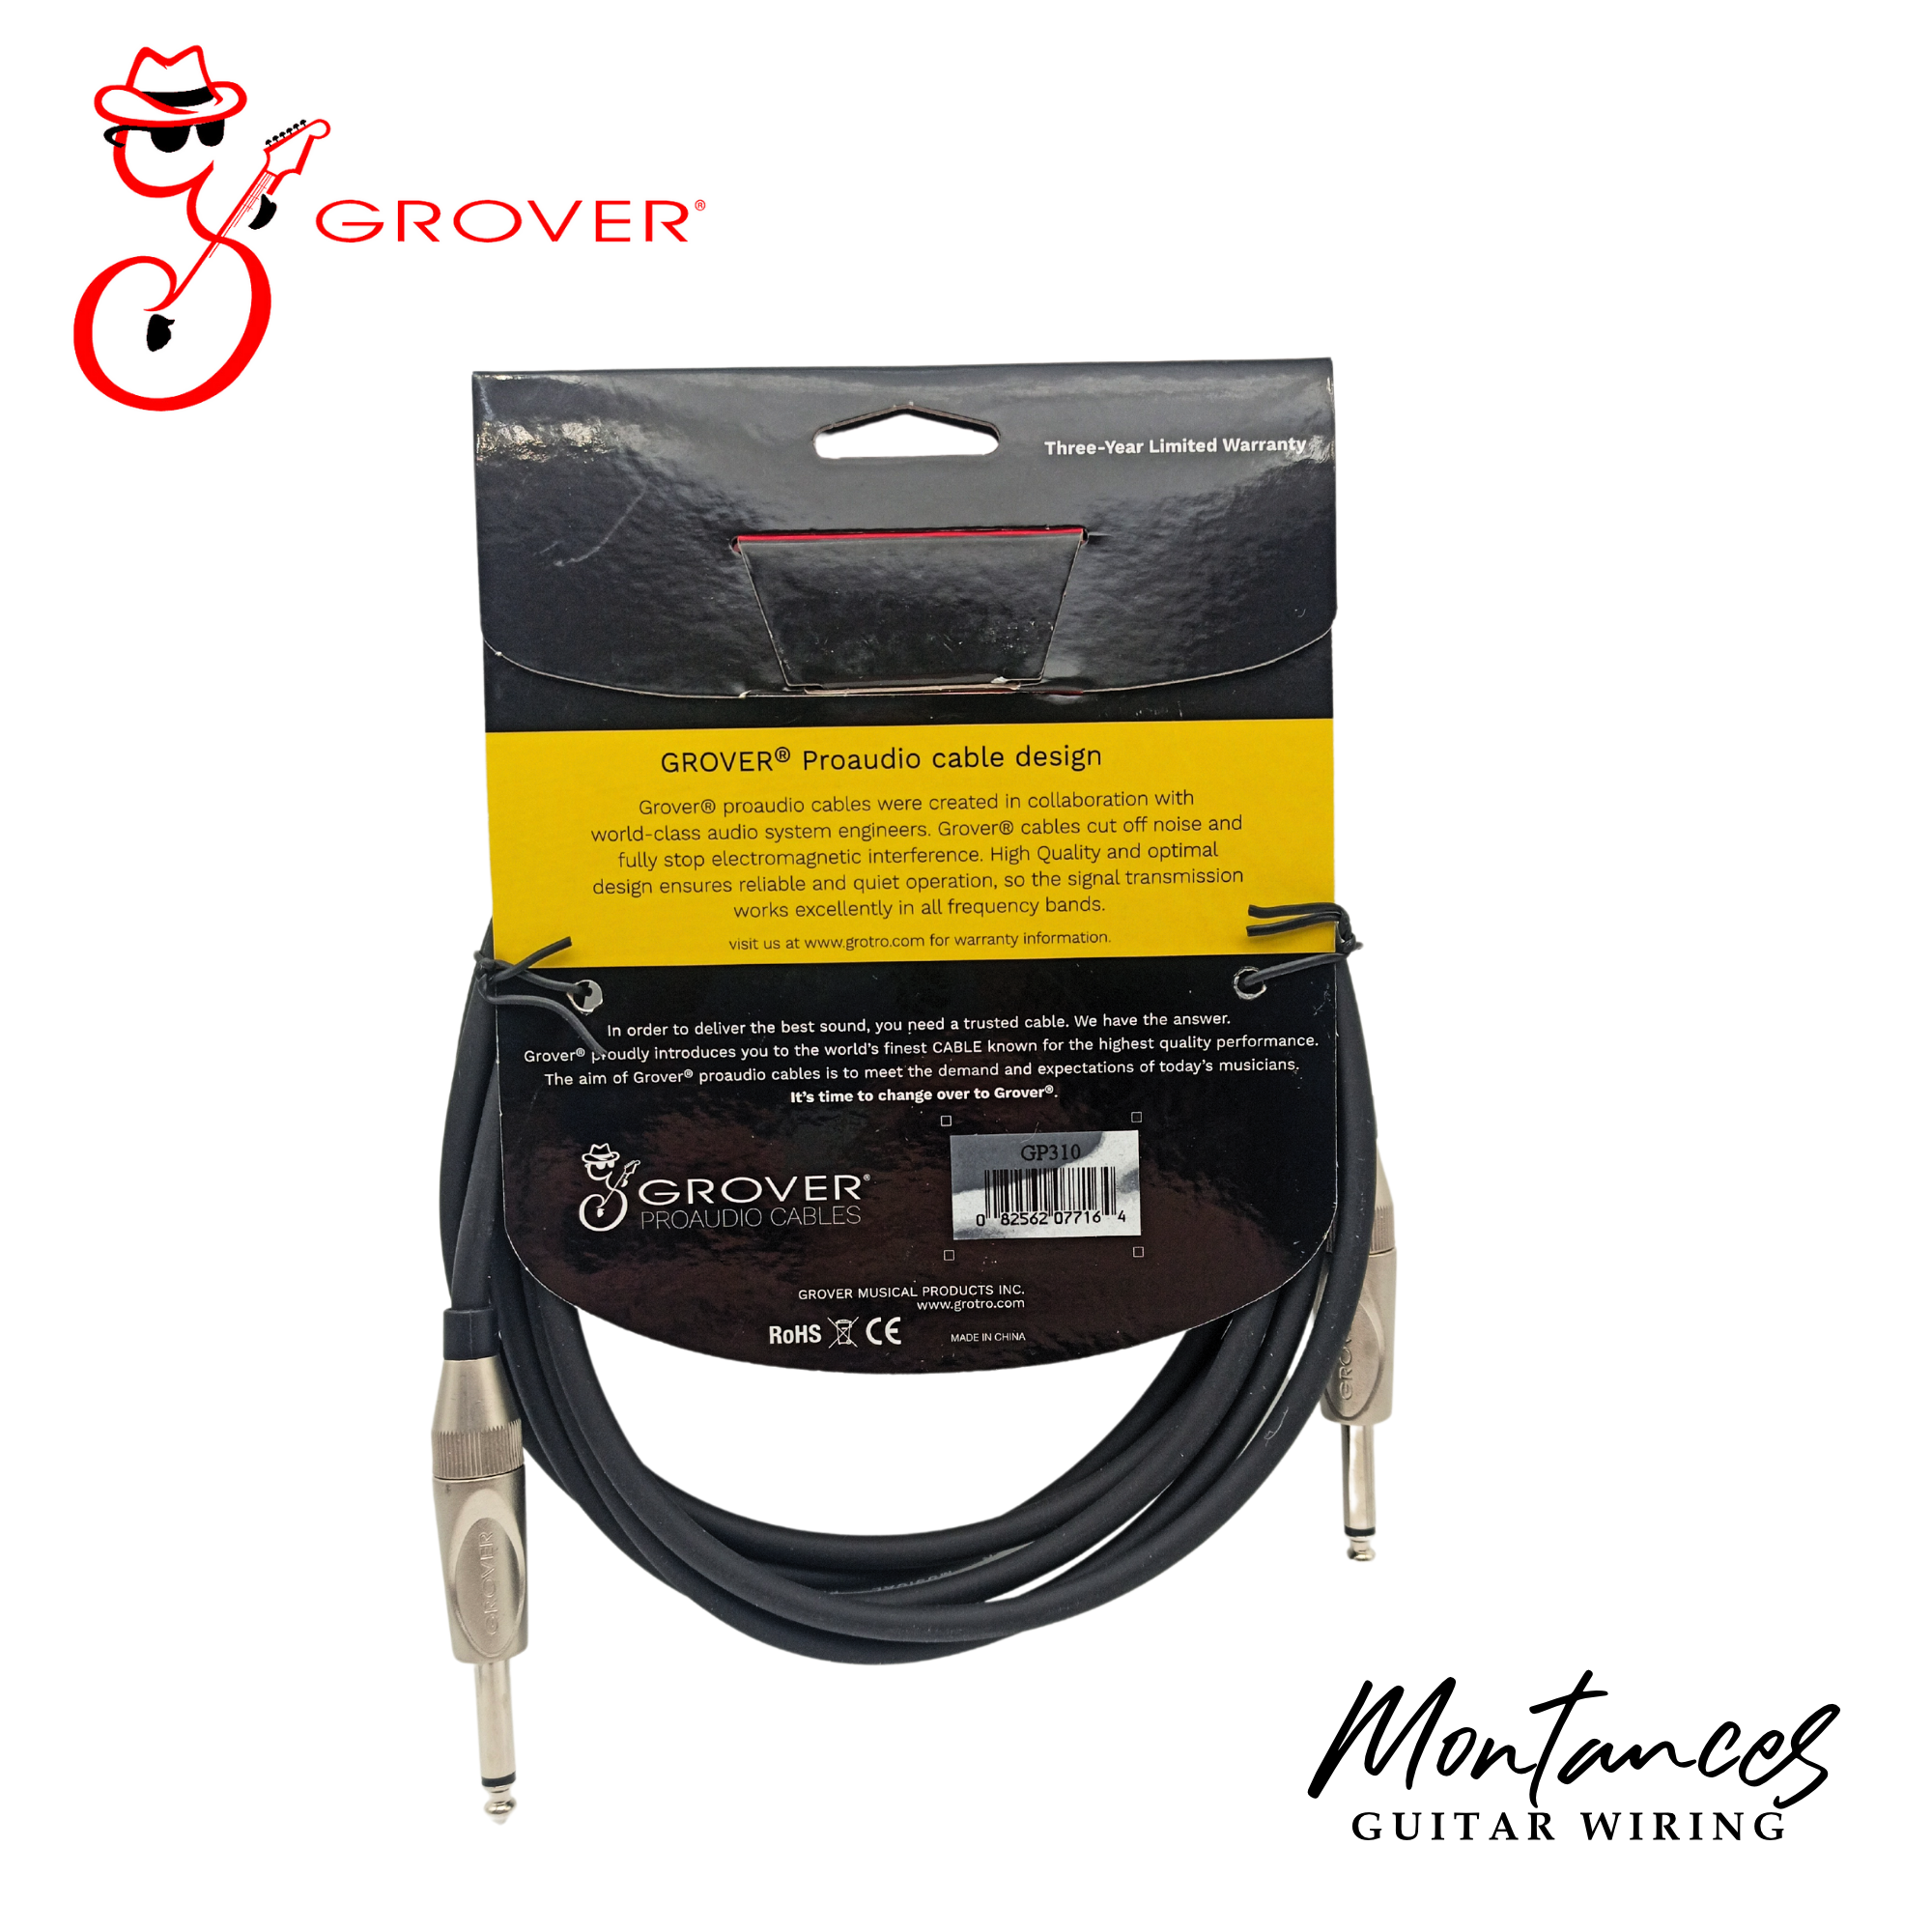 Grover Black Noiseless Instrument Cable